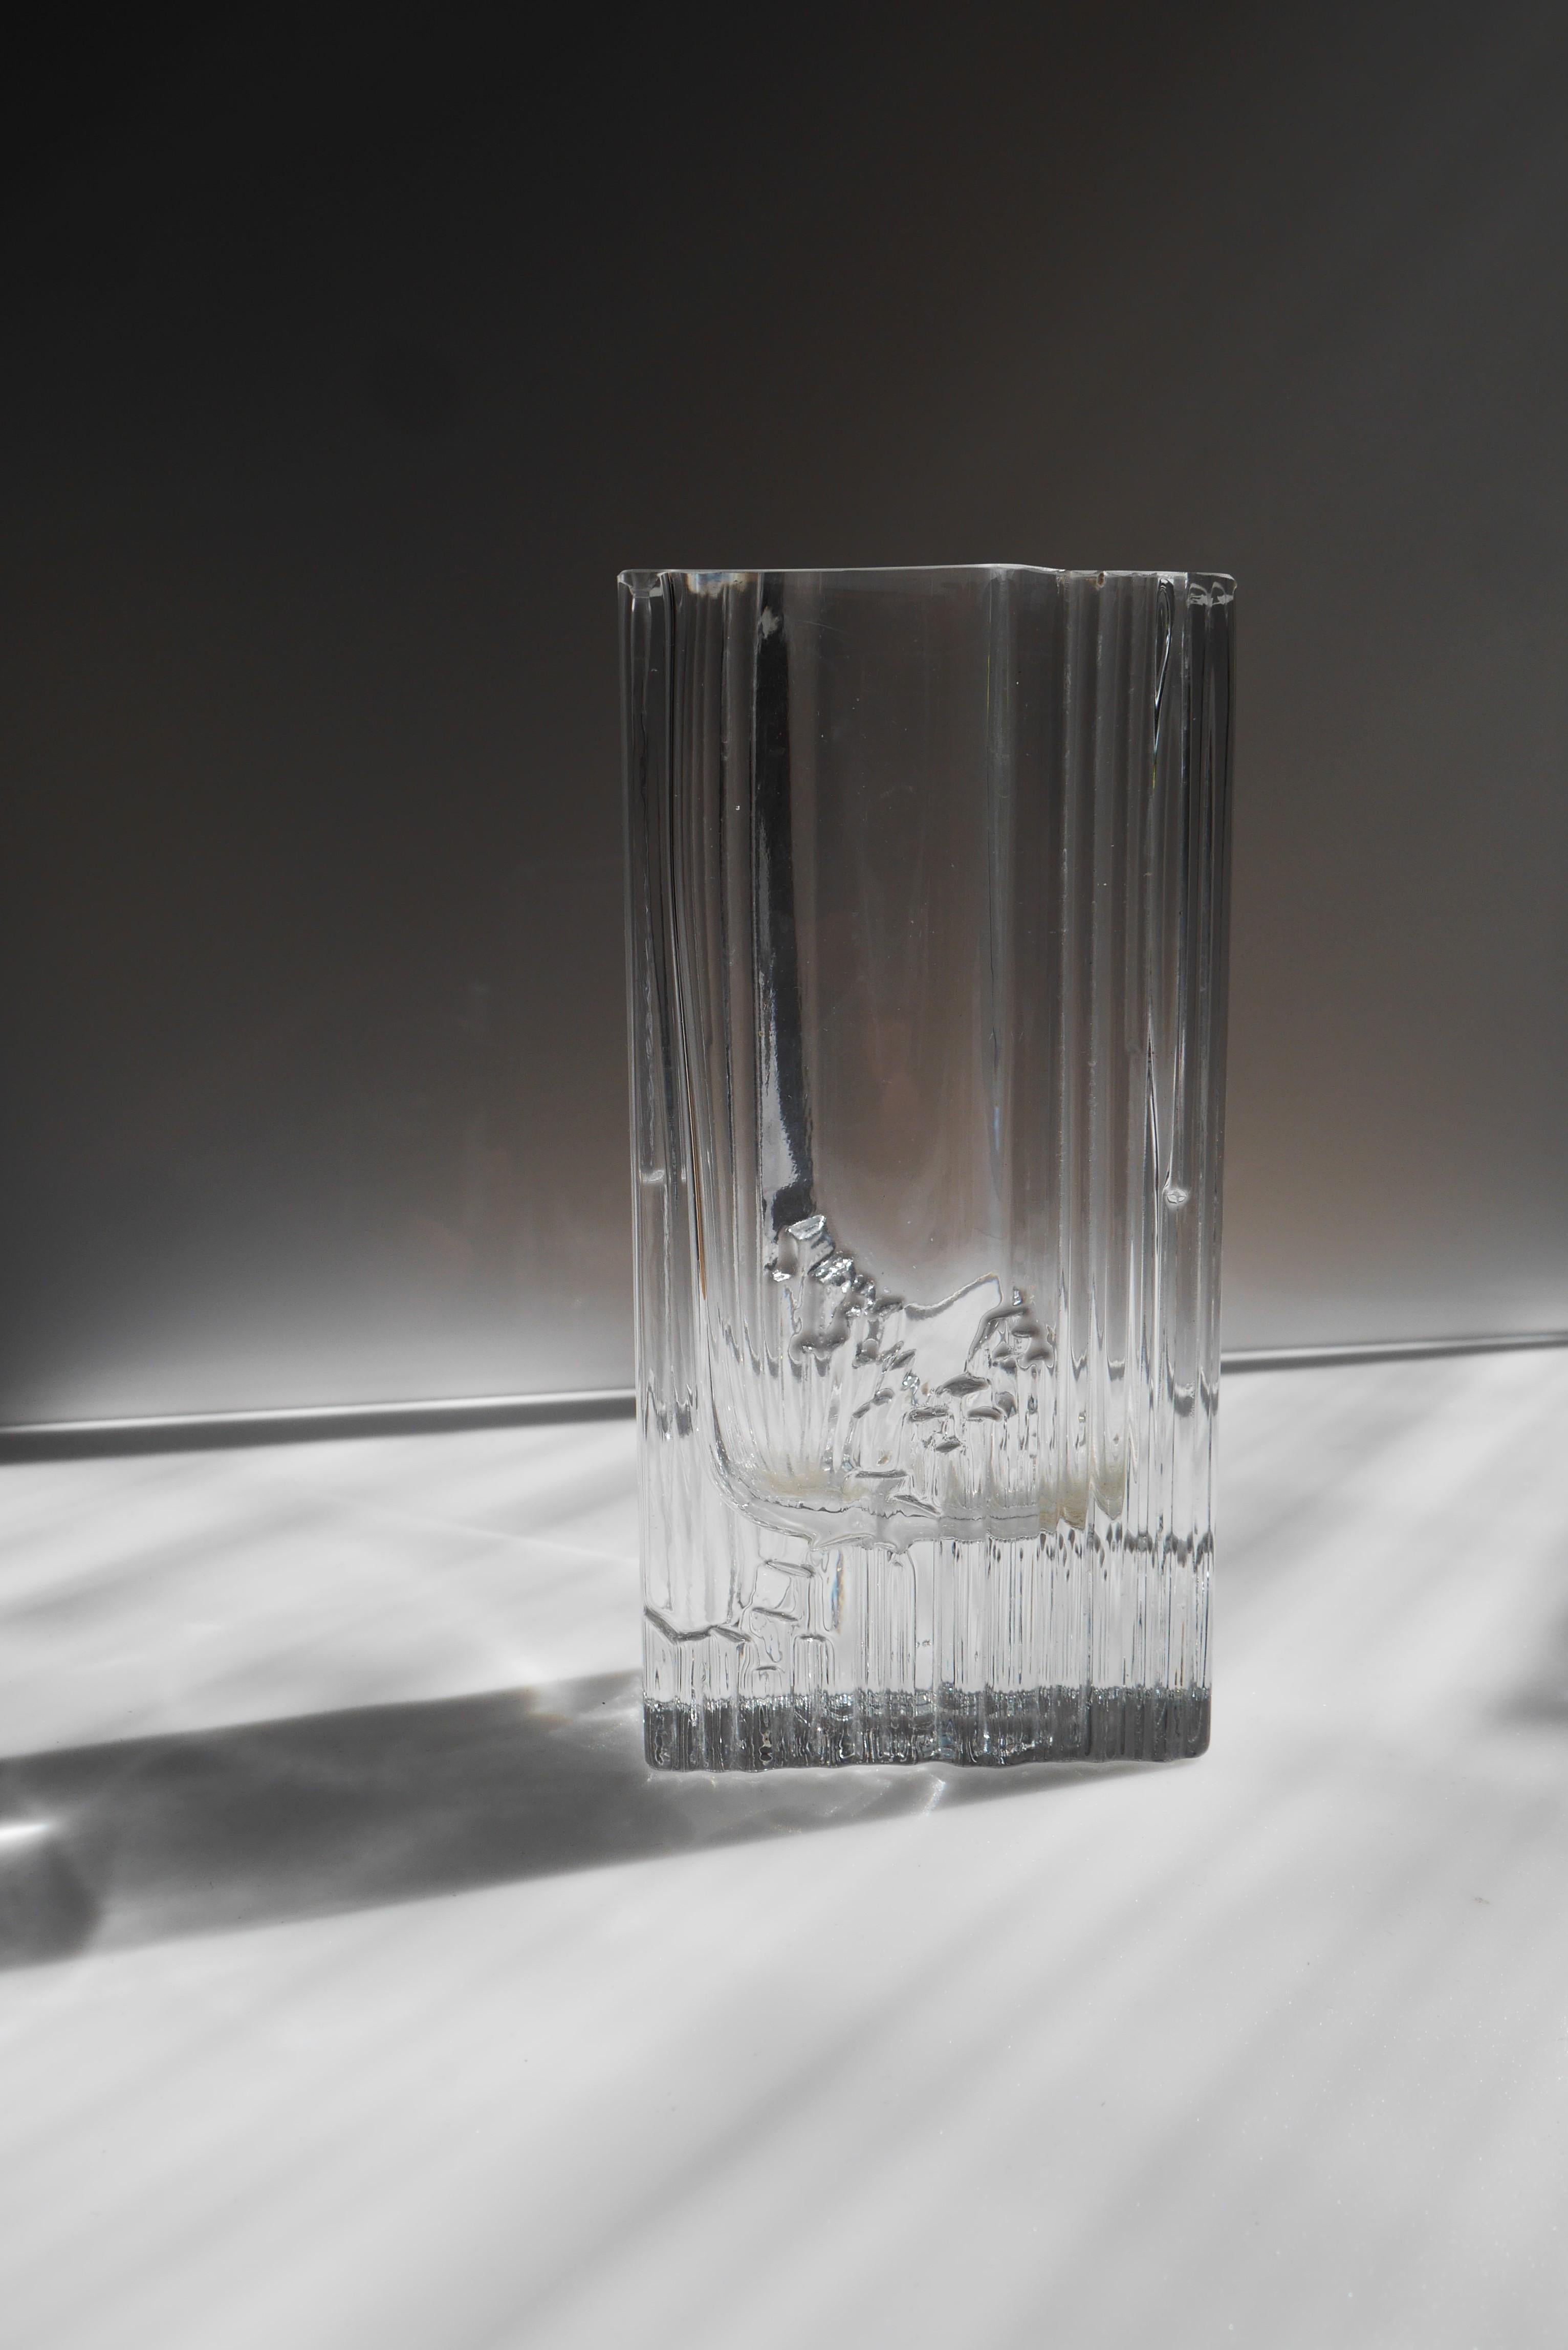 A mid-century modern glass vase made and signed by talented Tapio Wirkkala known as “Sointu”, Iittala. The name of the vase translates to 